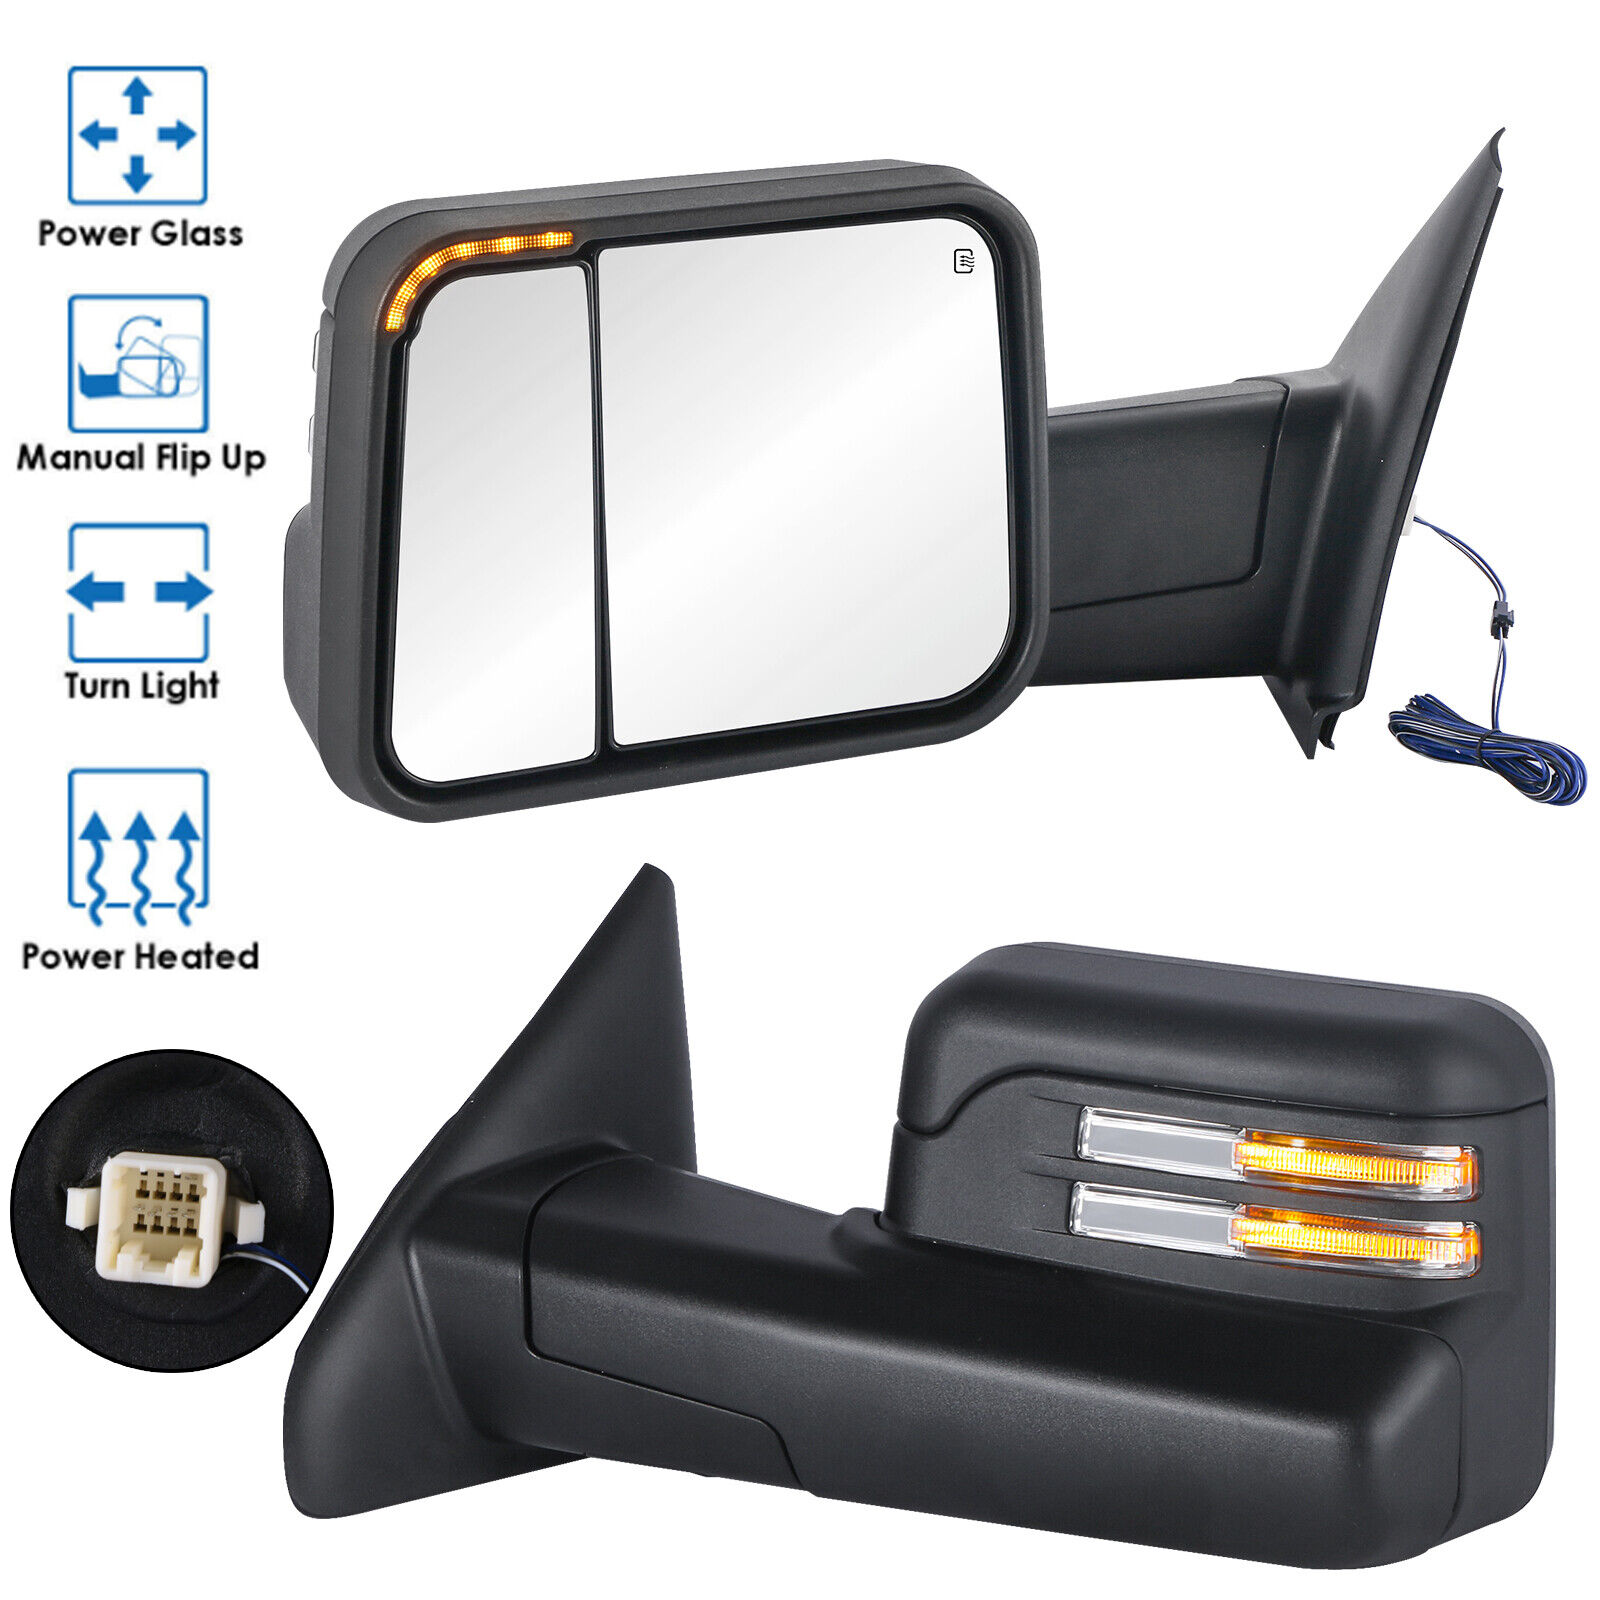 2X Power Heated Tow Mirrors w/ Led Turn Light For 2003-2009 Dodge Ram 2500 3500